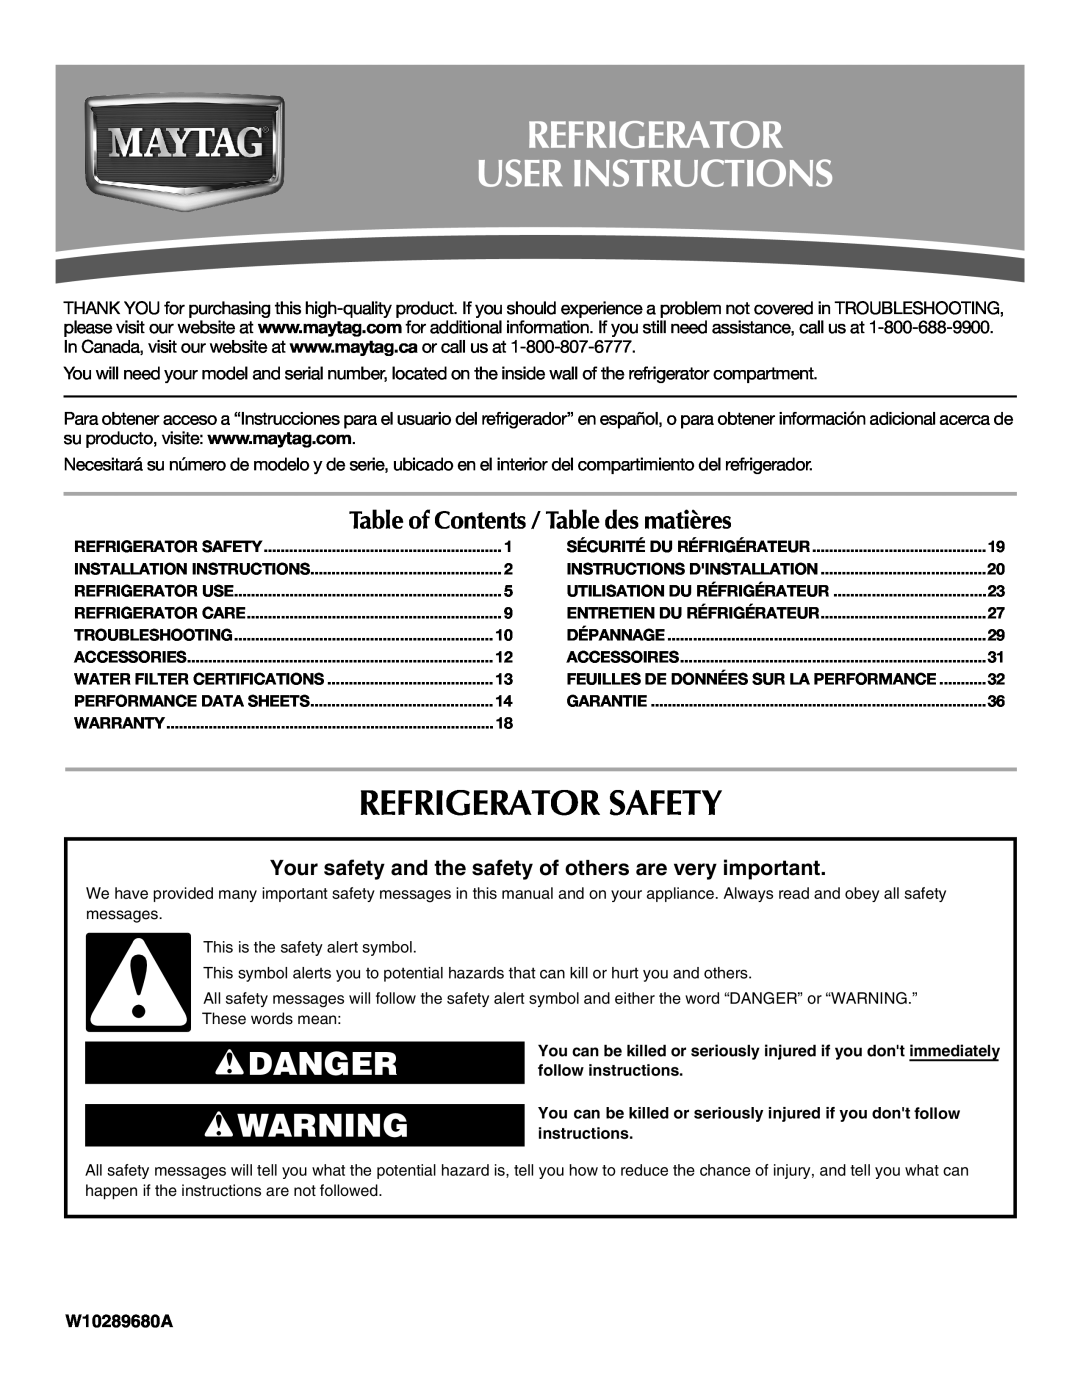 Maytag MSD2559XEB installation instructions Refrigerator User Instructions, Refrigerator Safety, Danger, W10289680A 